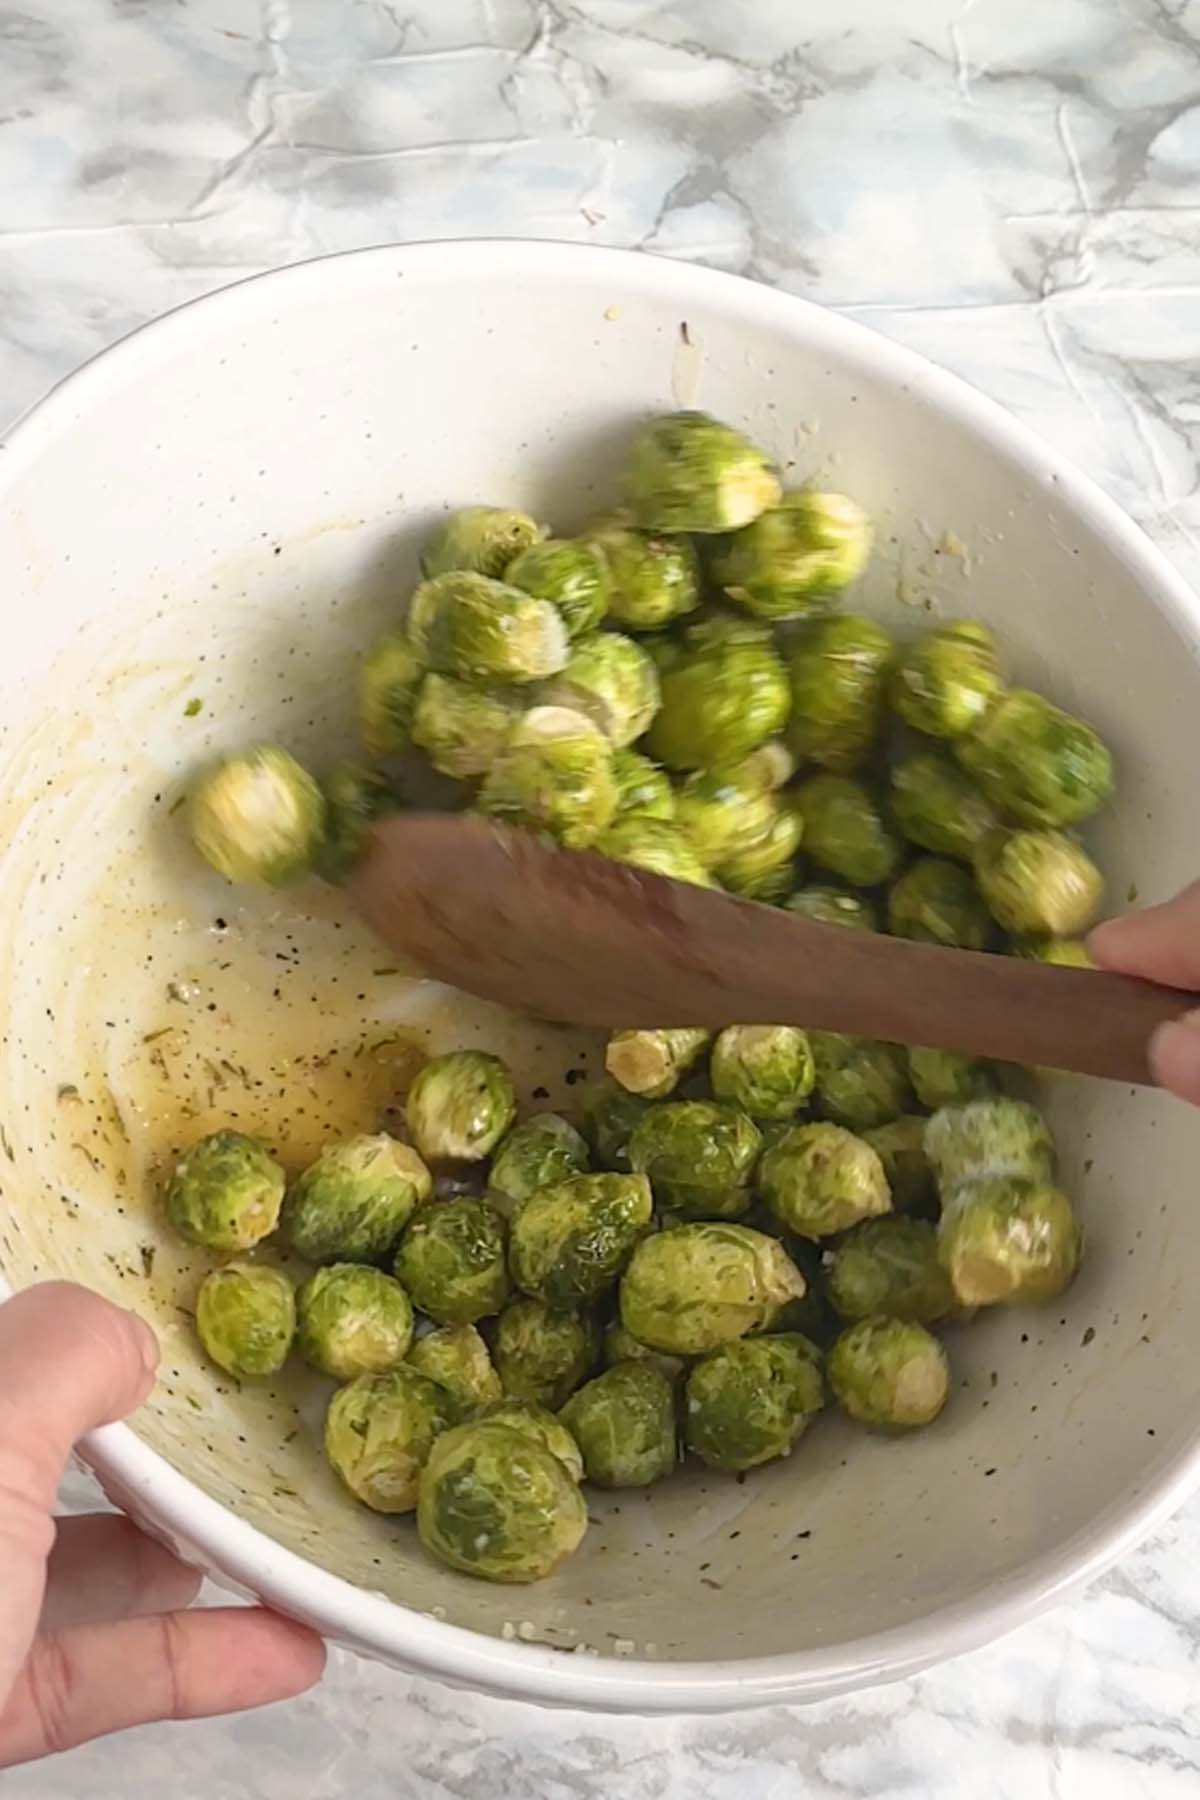 Brussels sprouts are mixed with a sauce in a large bowl.